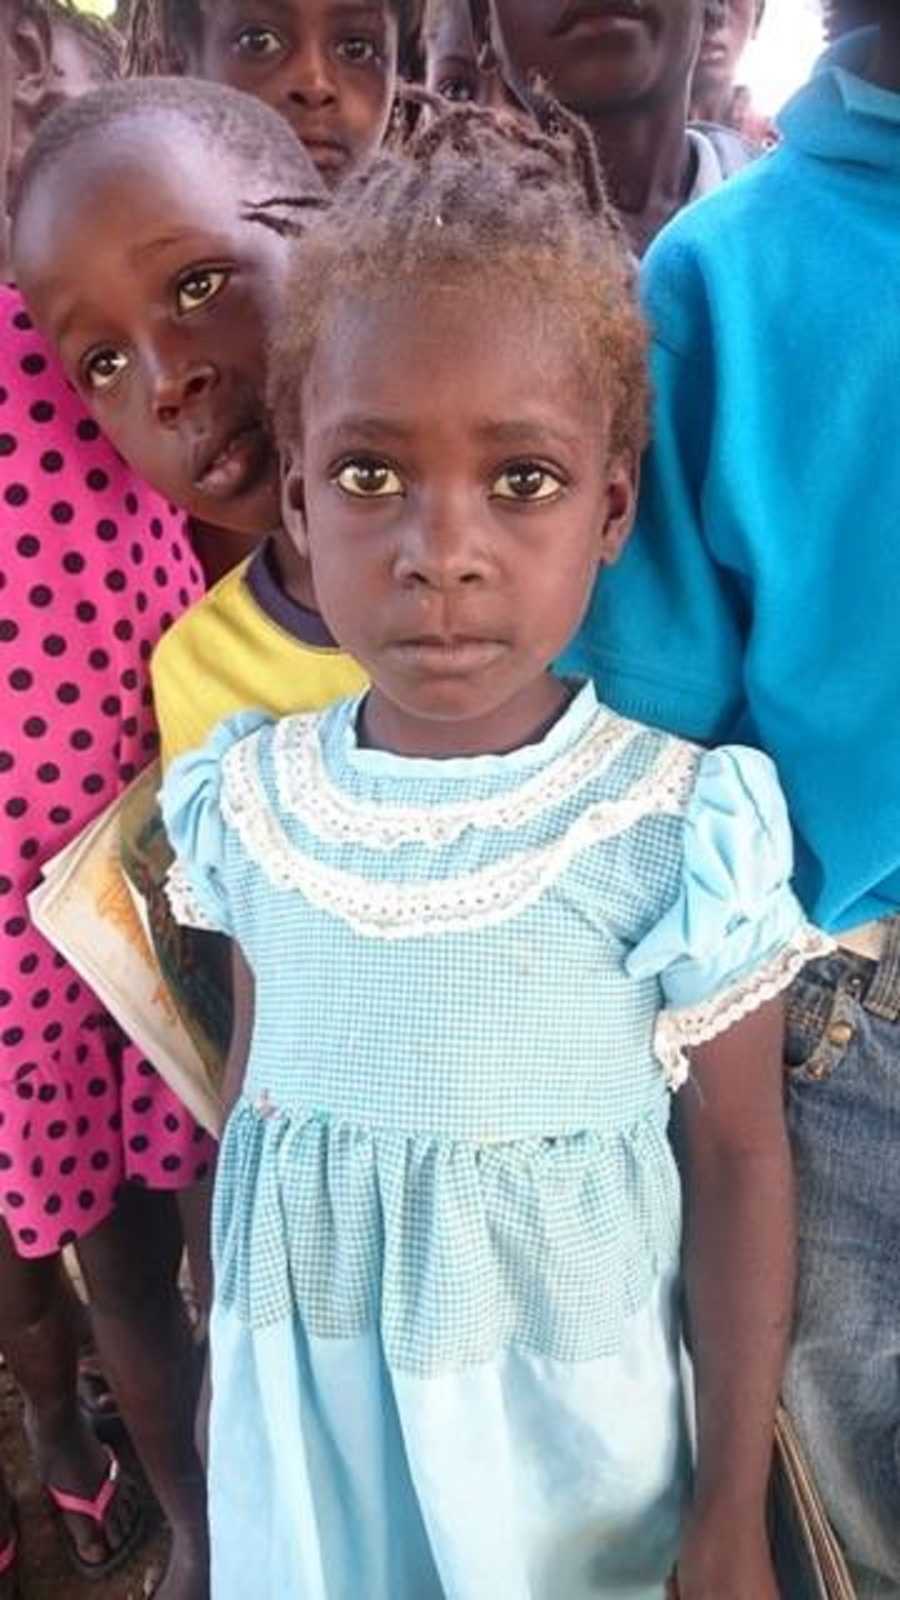 Close up of little girl who is an orphan in Haiti who looks sad